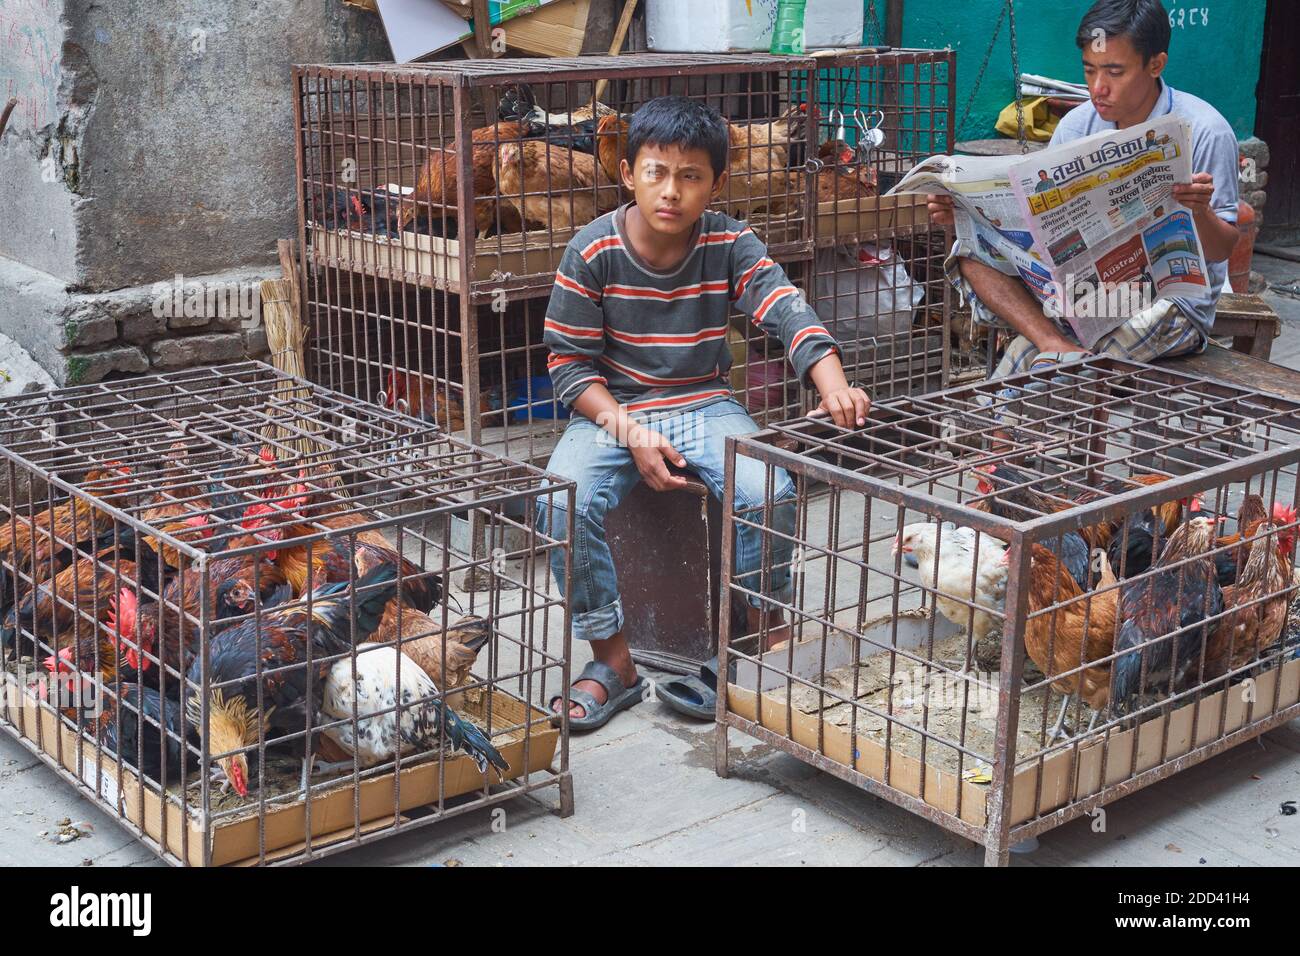 A young chicken vendor in Kathmandu, Nepal, sitting between his cages full of chickens Stock Photo